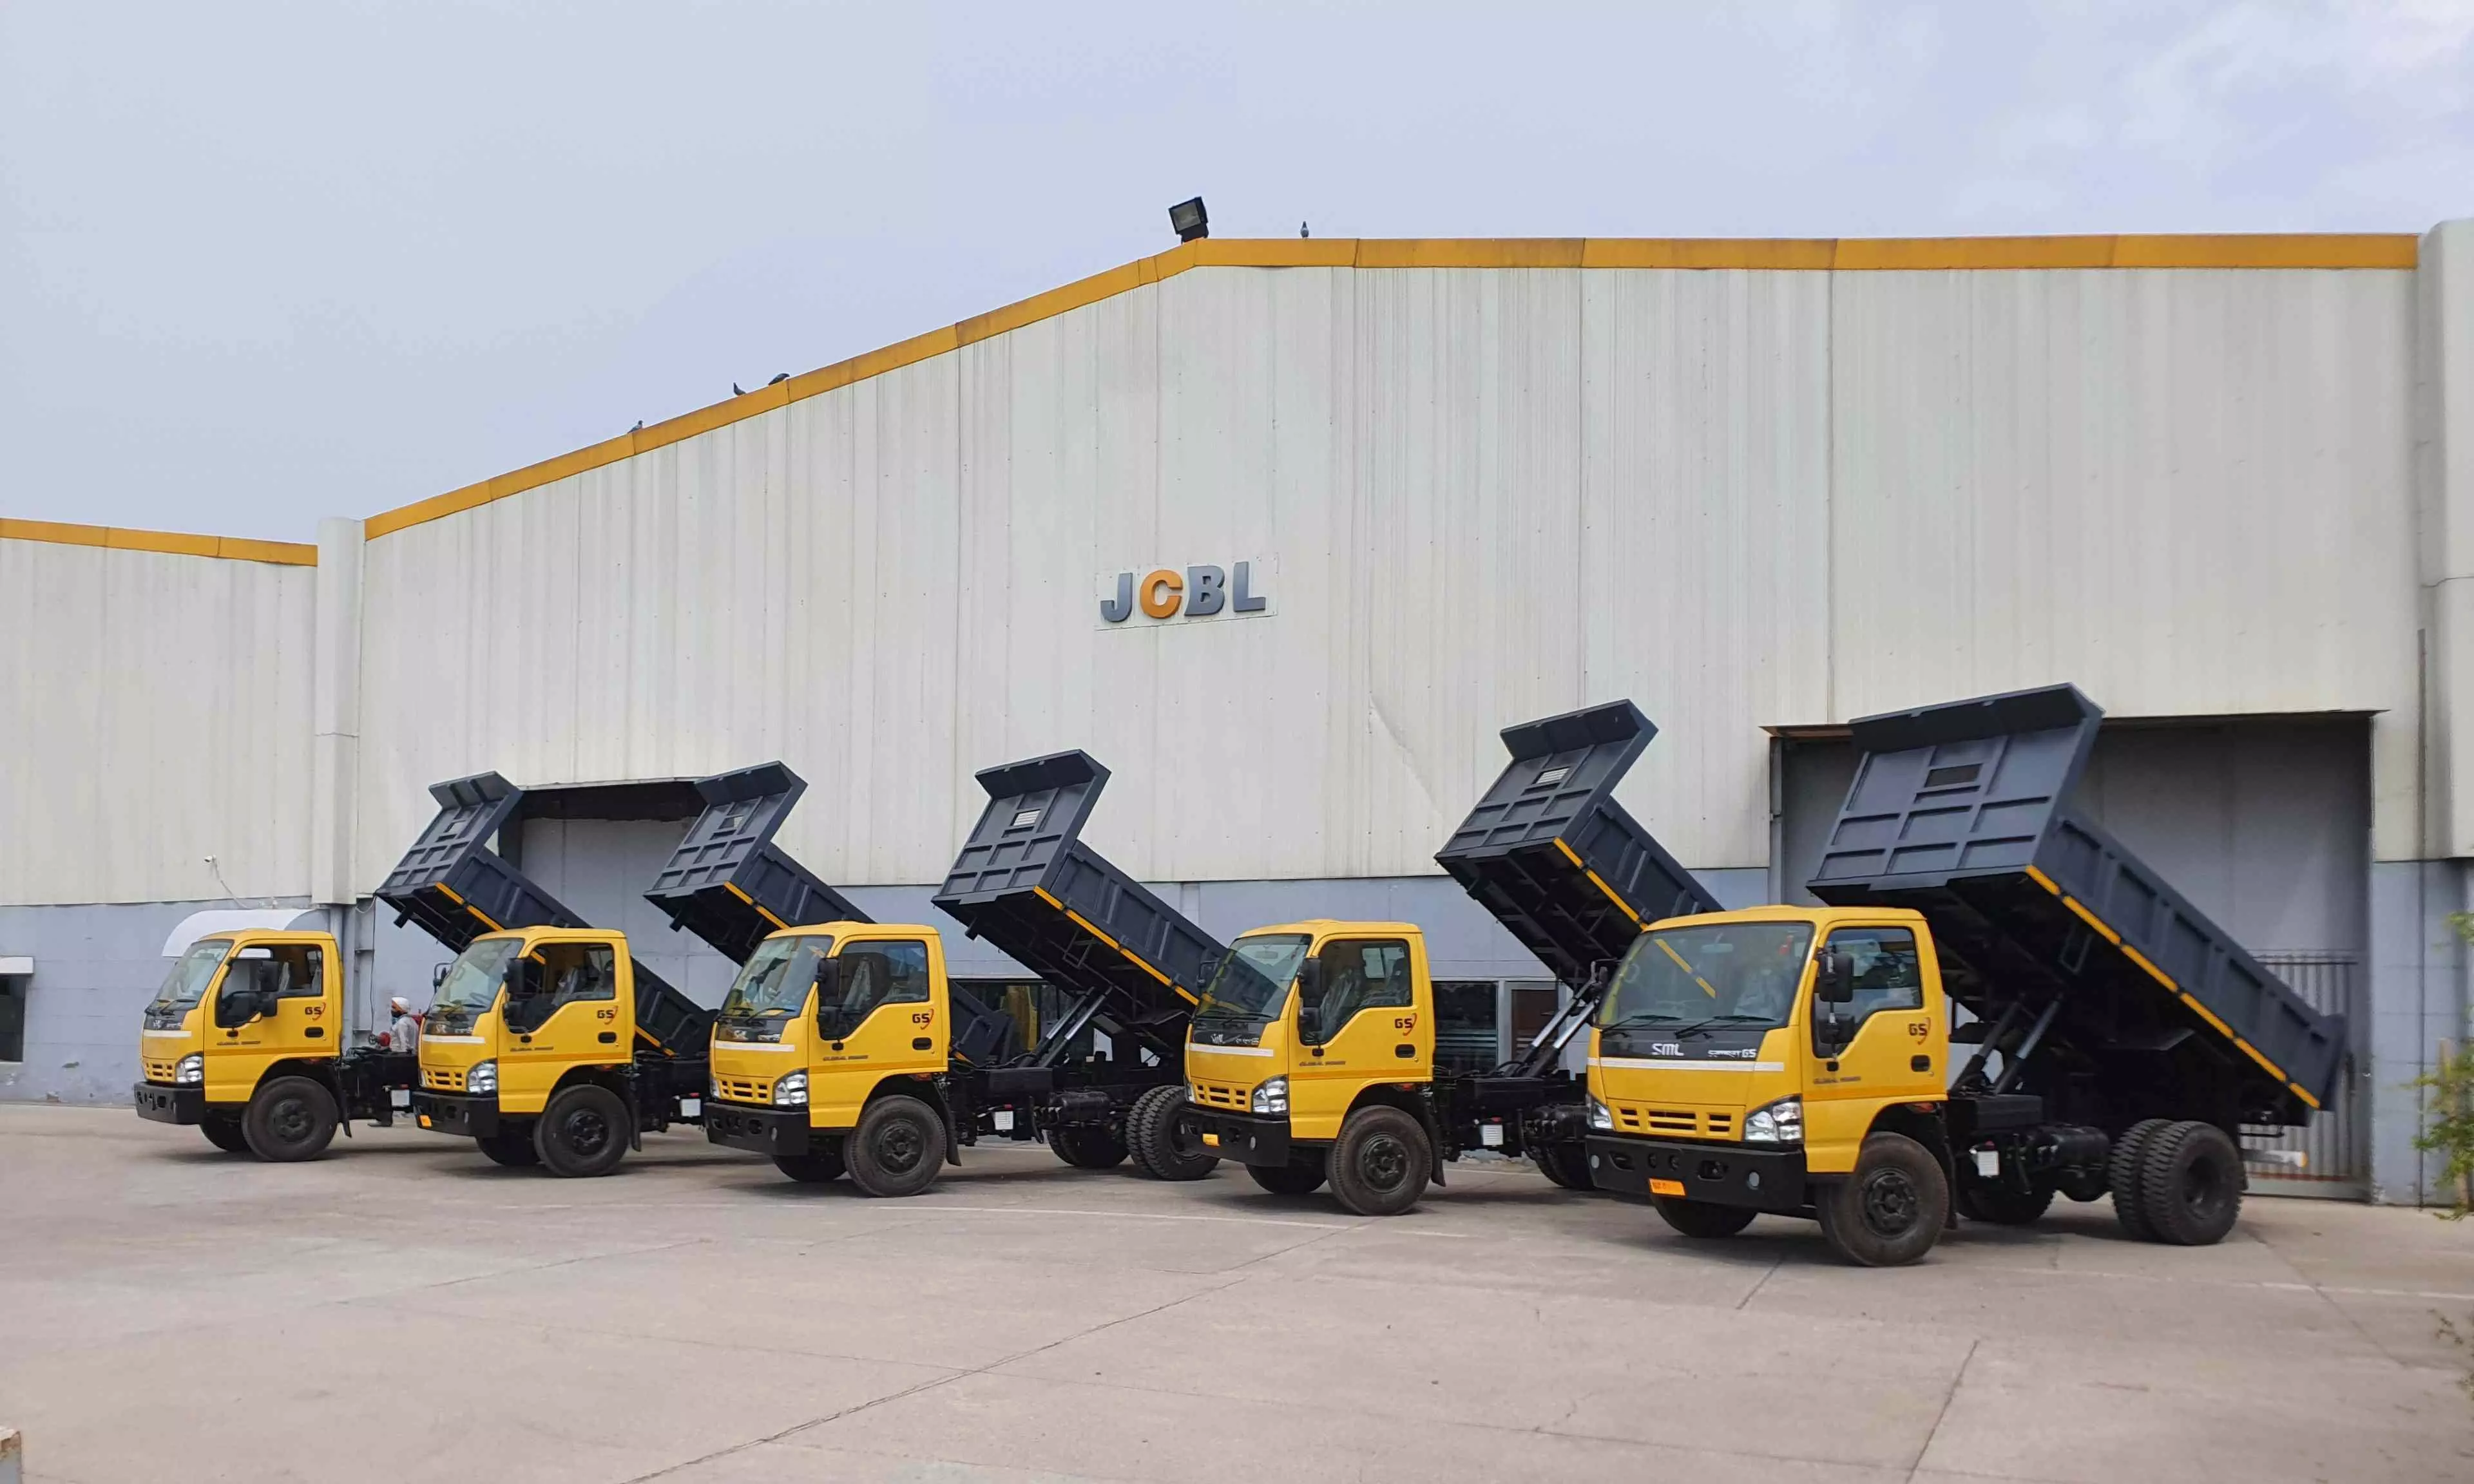 Gravity model of logistics helps us mitigate impacts of supply chain disruptions: JCBL